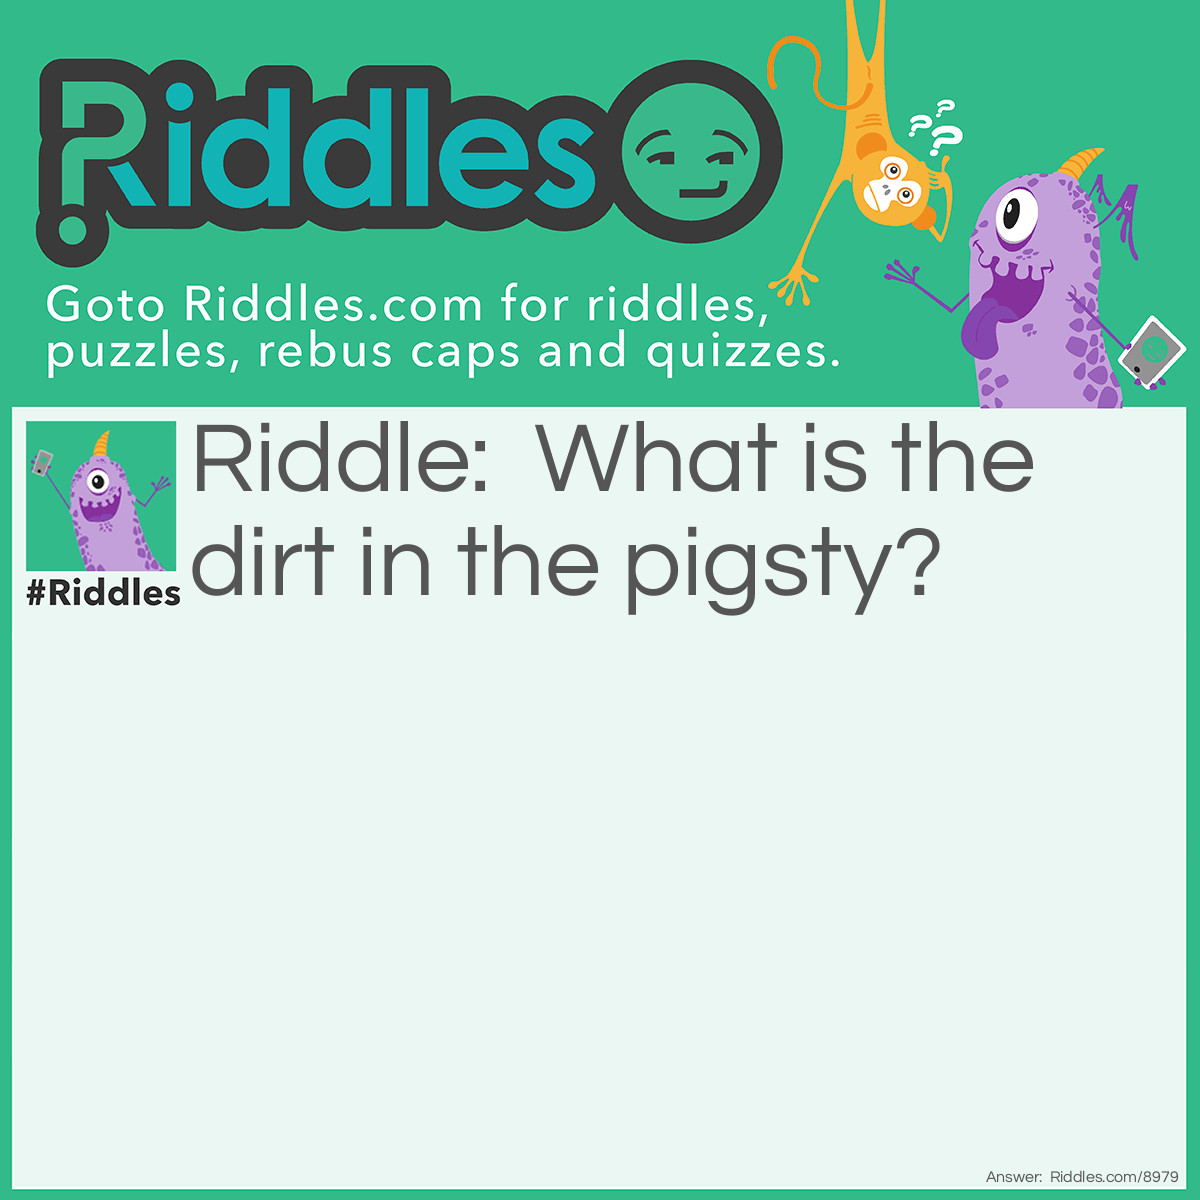 Riddle: What is the dirt in the pigsty? Answer: Mud!!!!